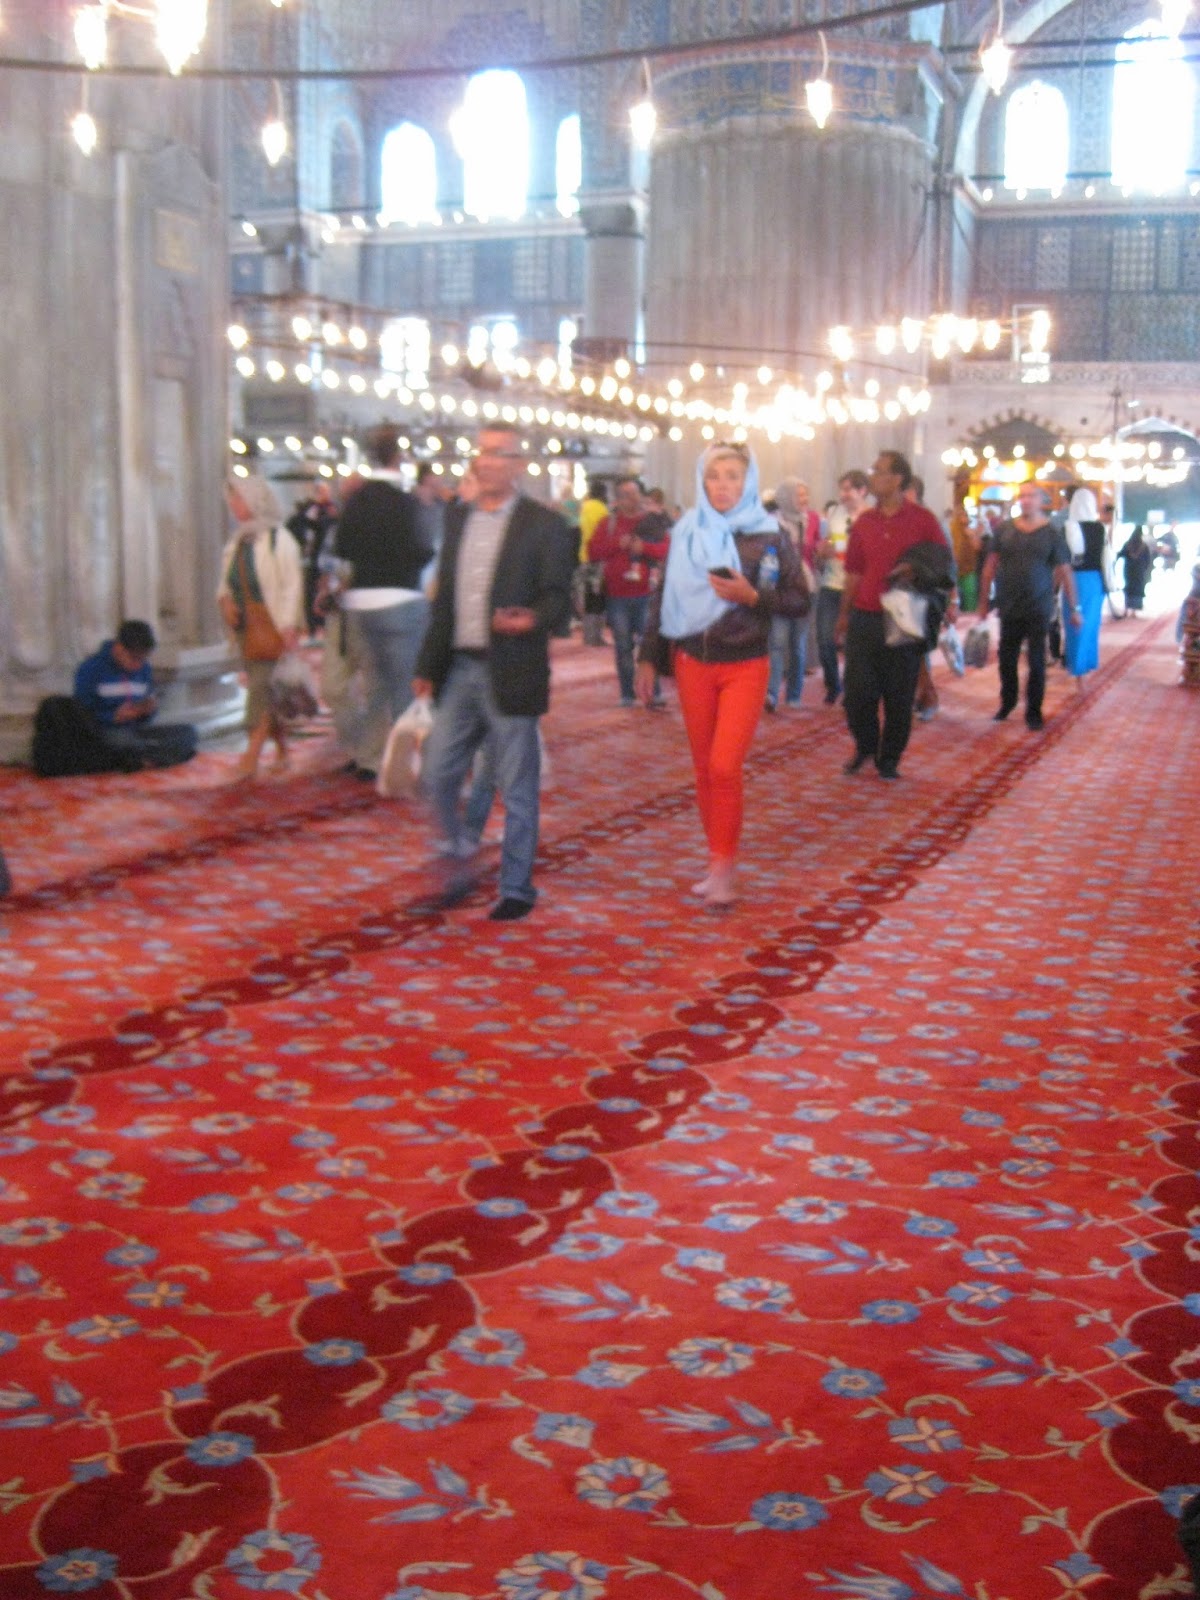 Istanbul - The carpet inside is colorful and very comfortable